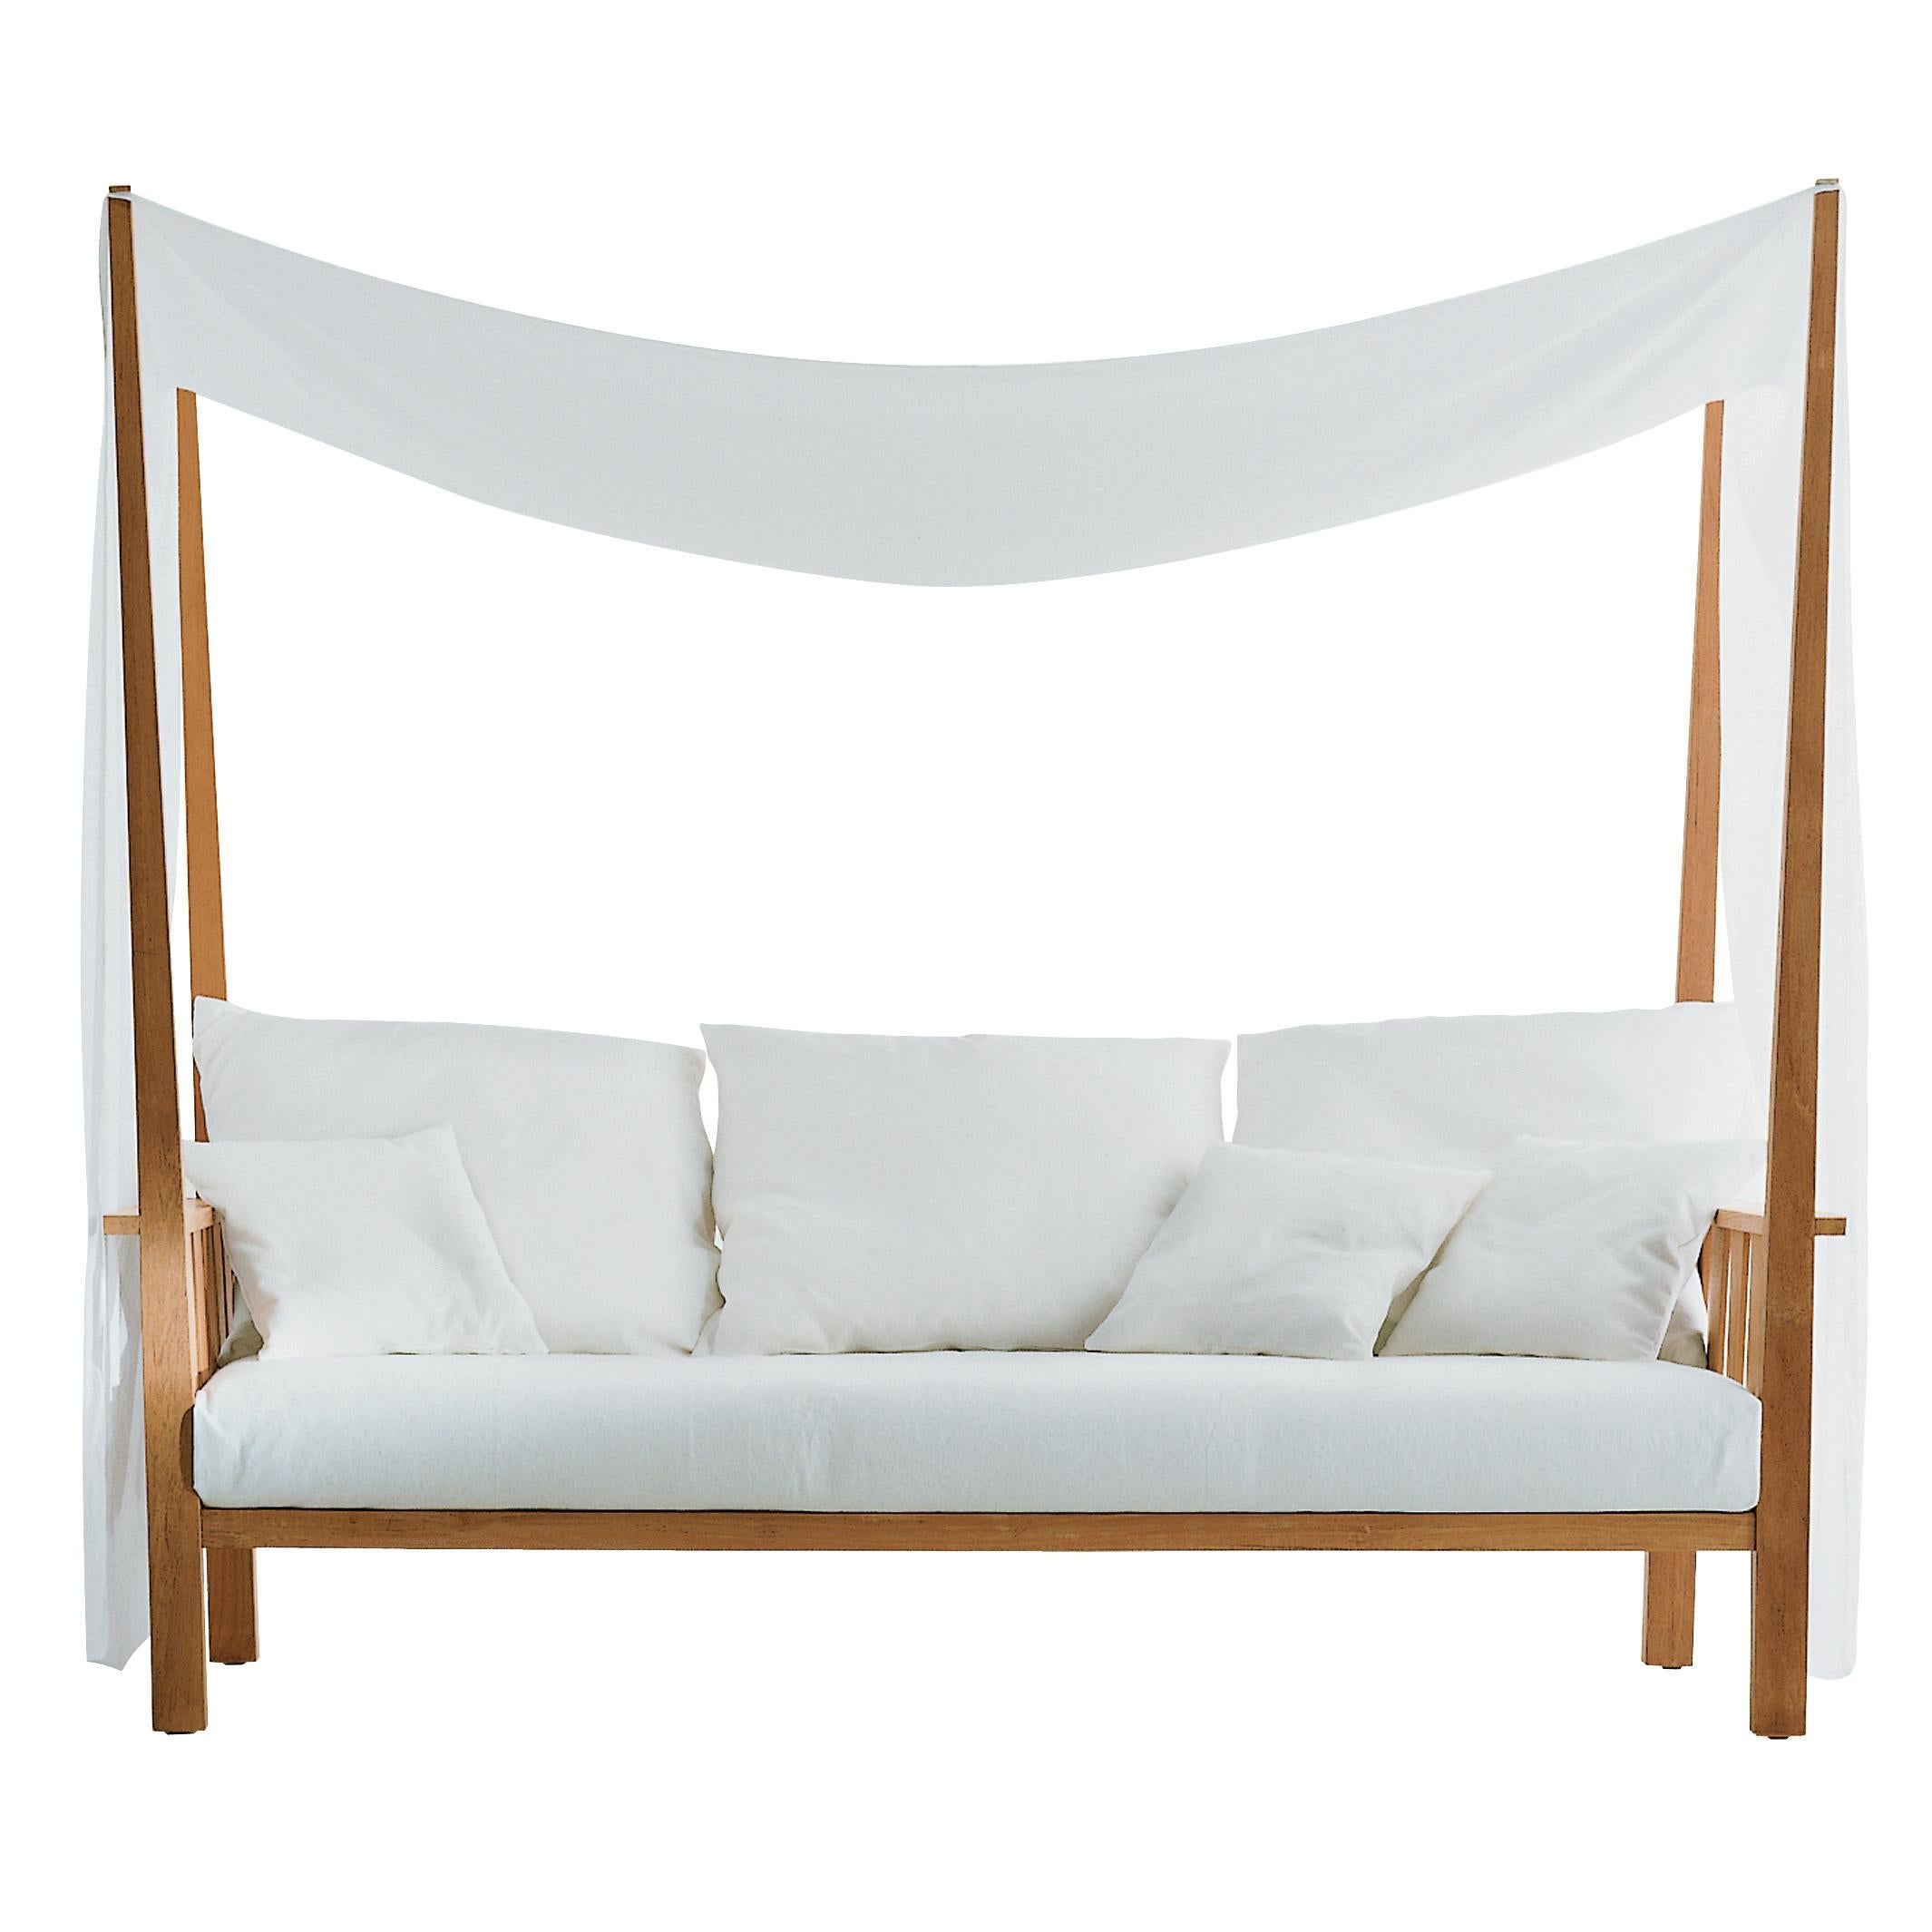 Gervasoni Inout Canopy Sofa in Aspen 03 Upholstery with Natural Teak Frame